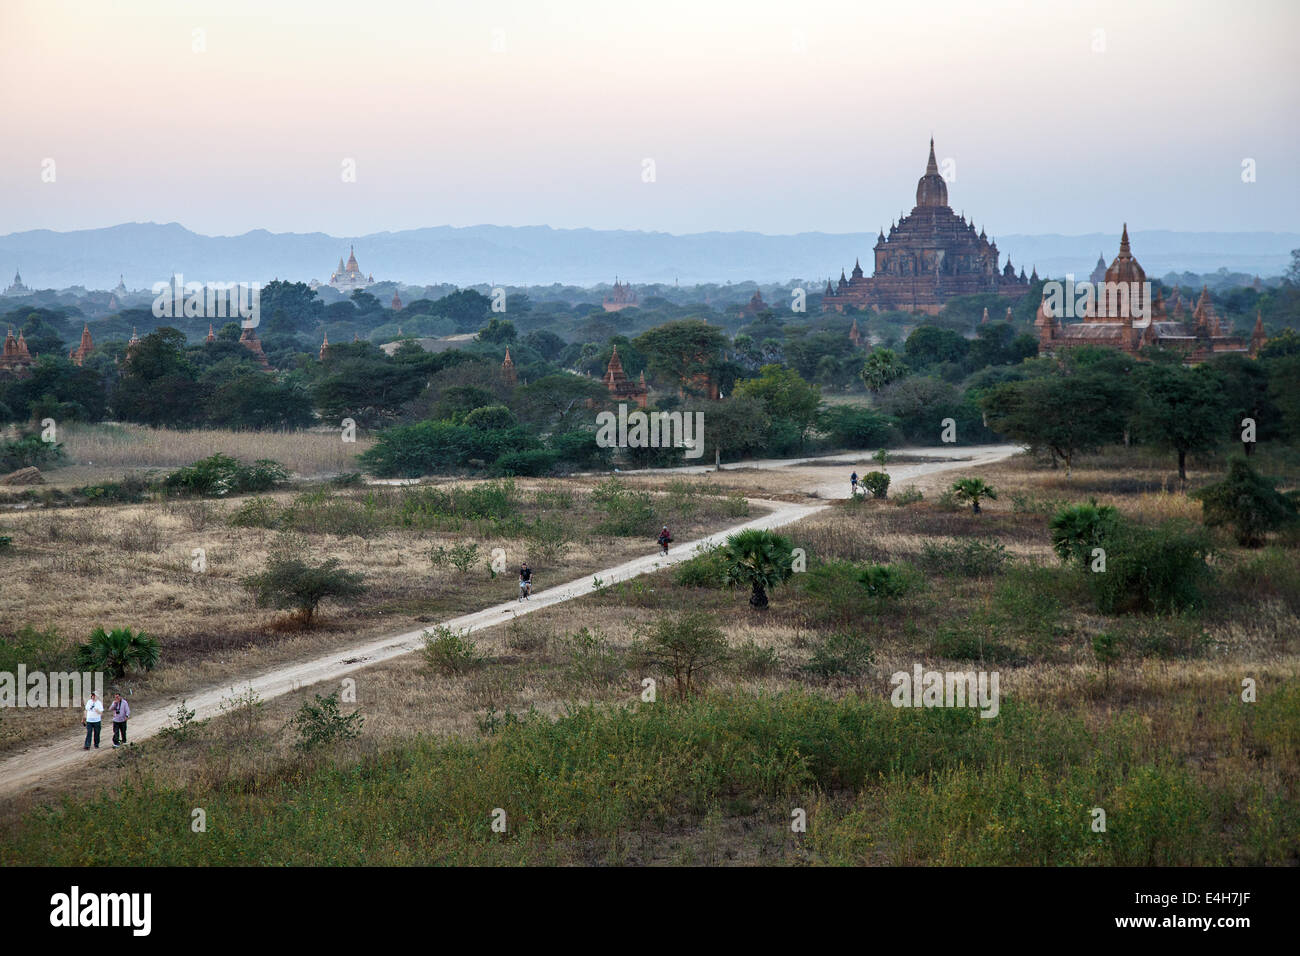 A view onto Bagan temples with tourists on the dirt road, Myanmar. Stock Photo